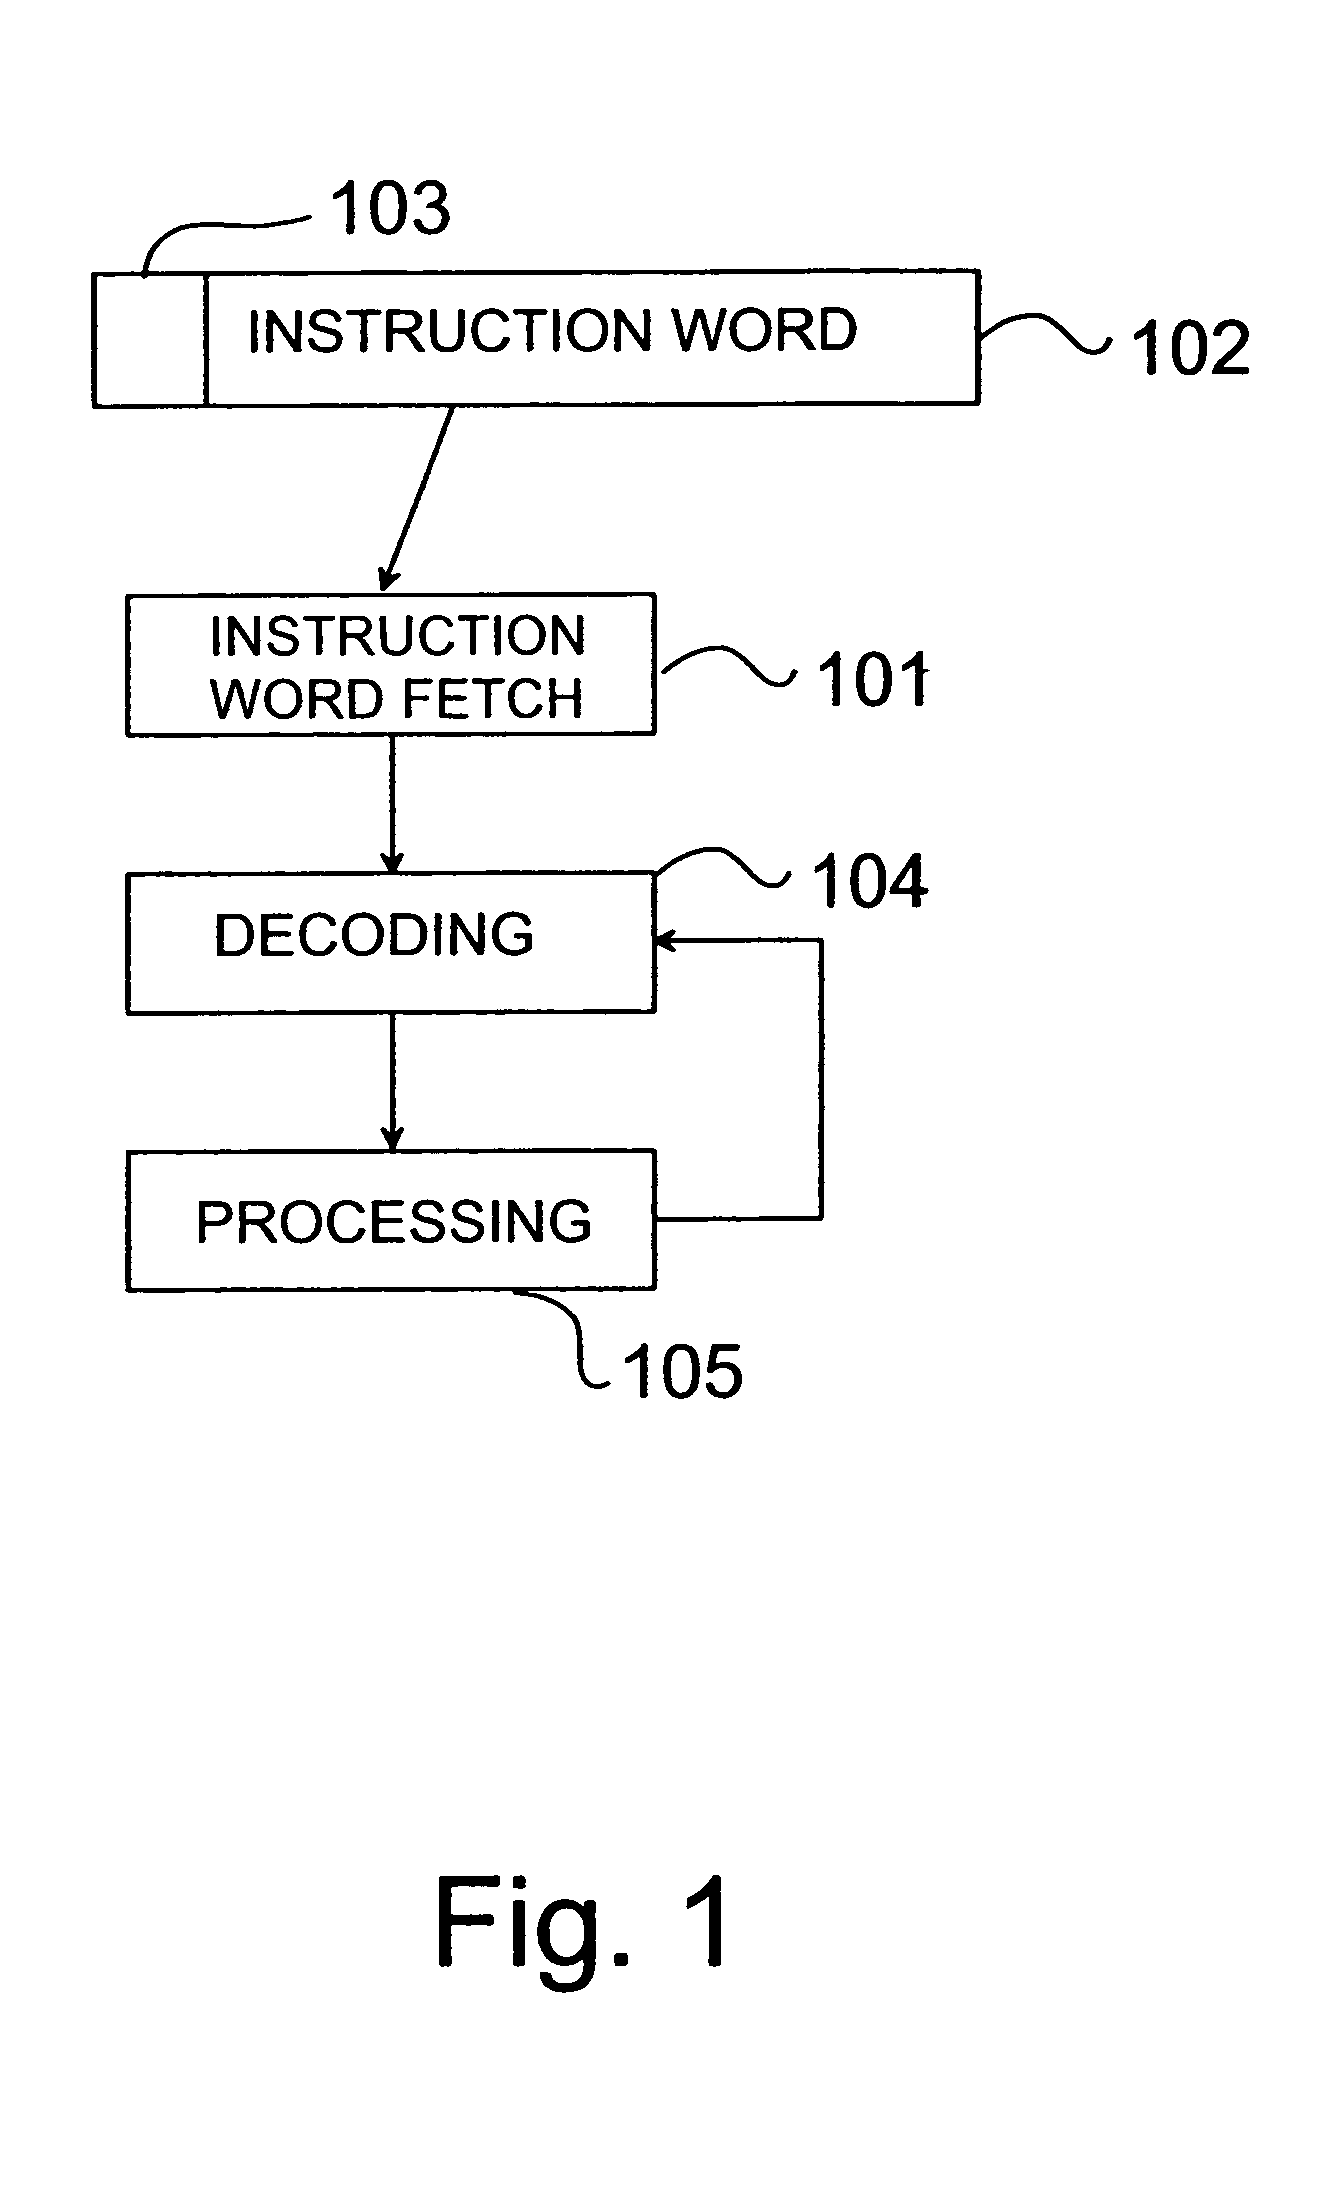 System for controlling operation of a processor based on information contained within instruction word